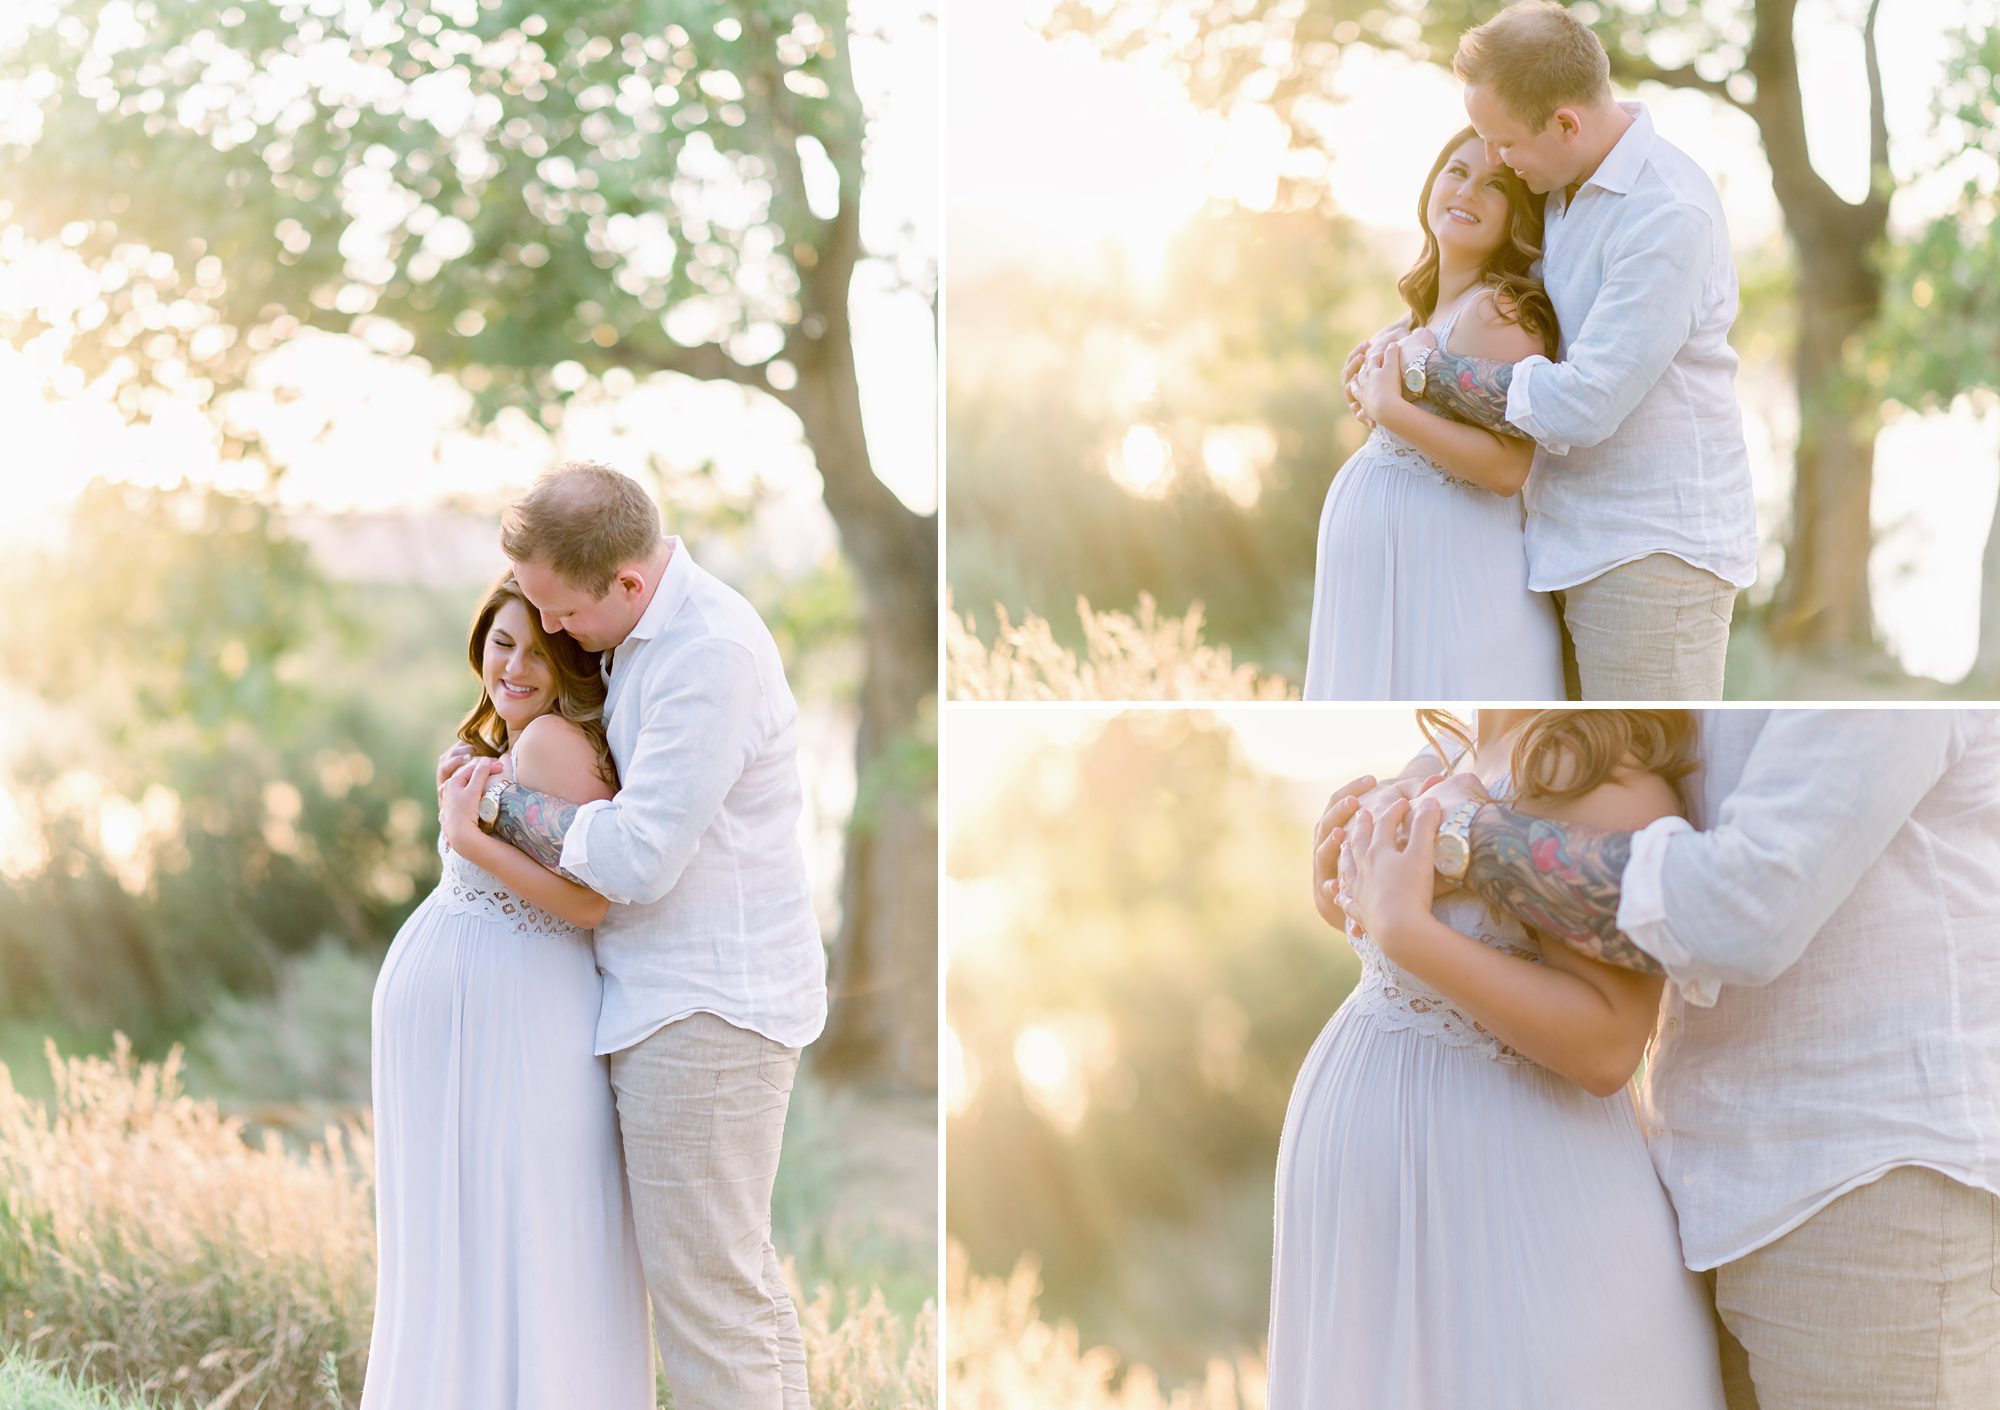 A gorgeous young couple get light and airy maternity photos done at a picturesque park in Wheat Ridge, Colorado.